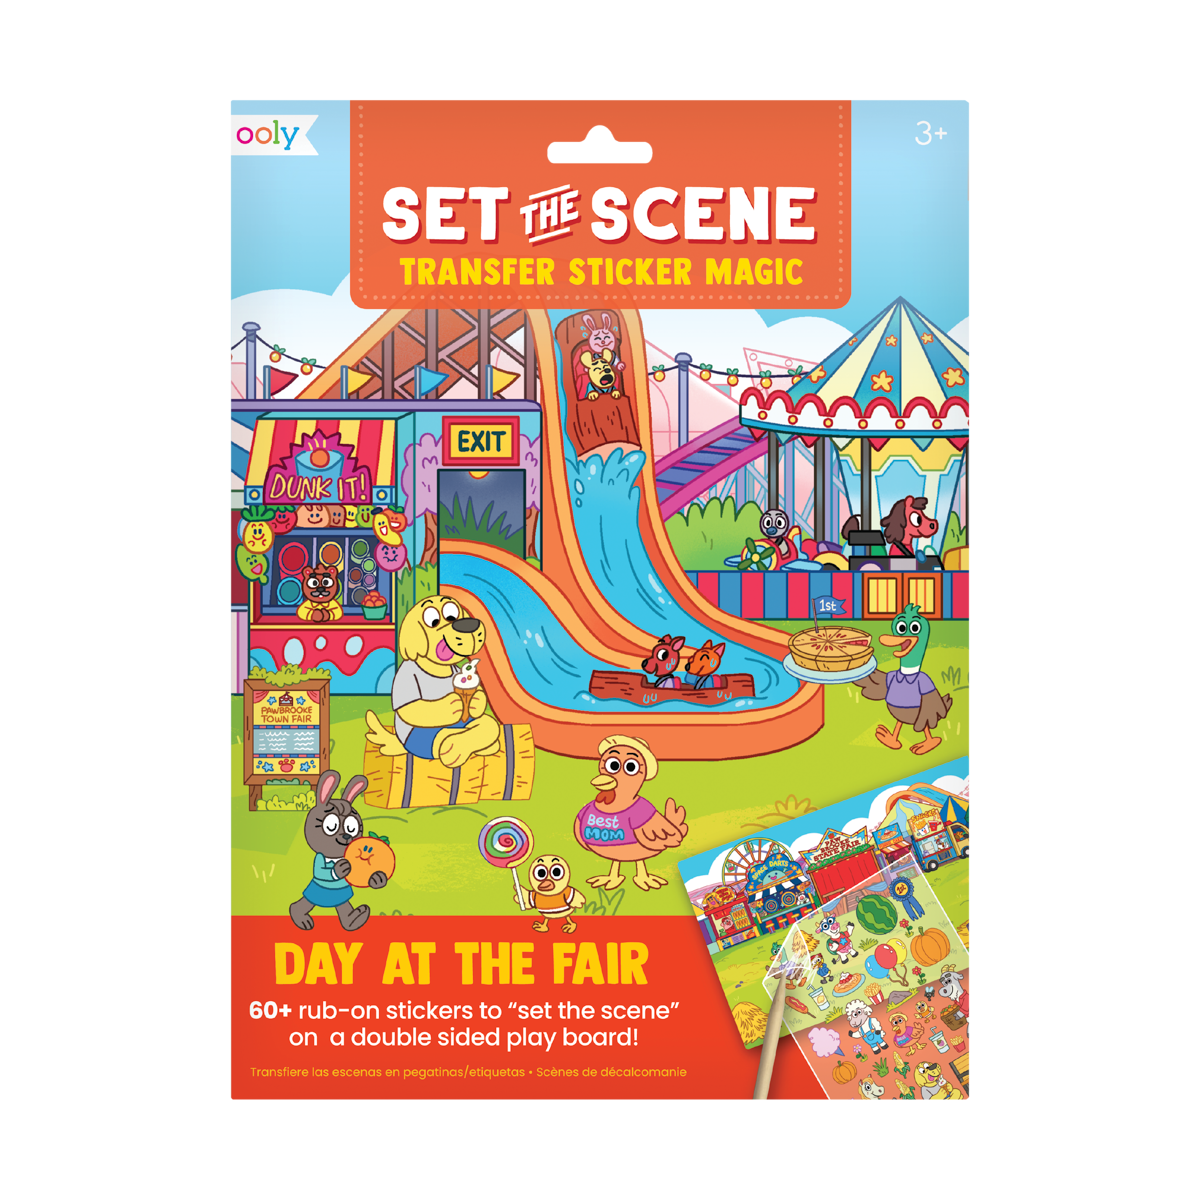 OOLY Set The Scene Transfer Stickers Magic - Day At The Fair Stickers